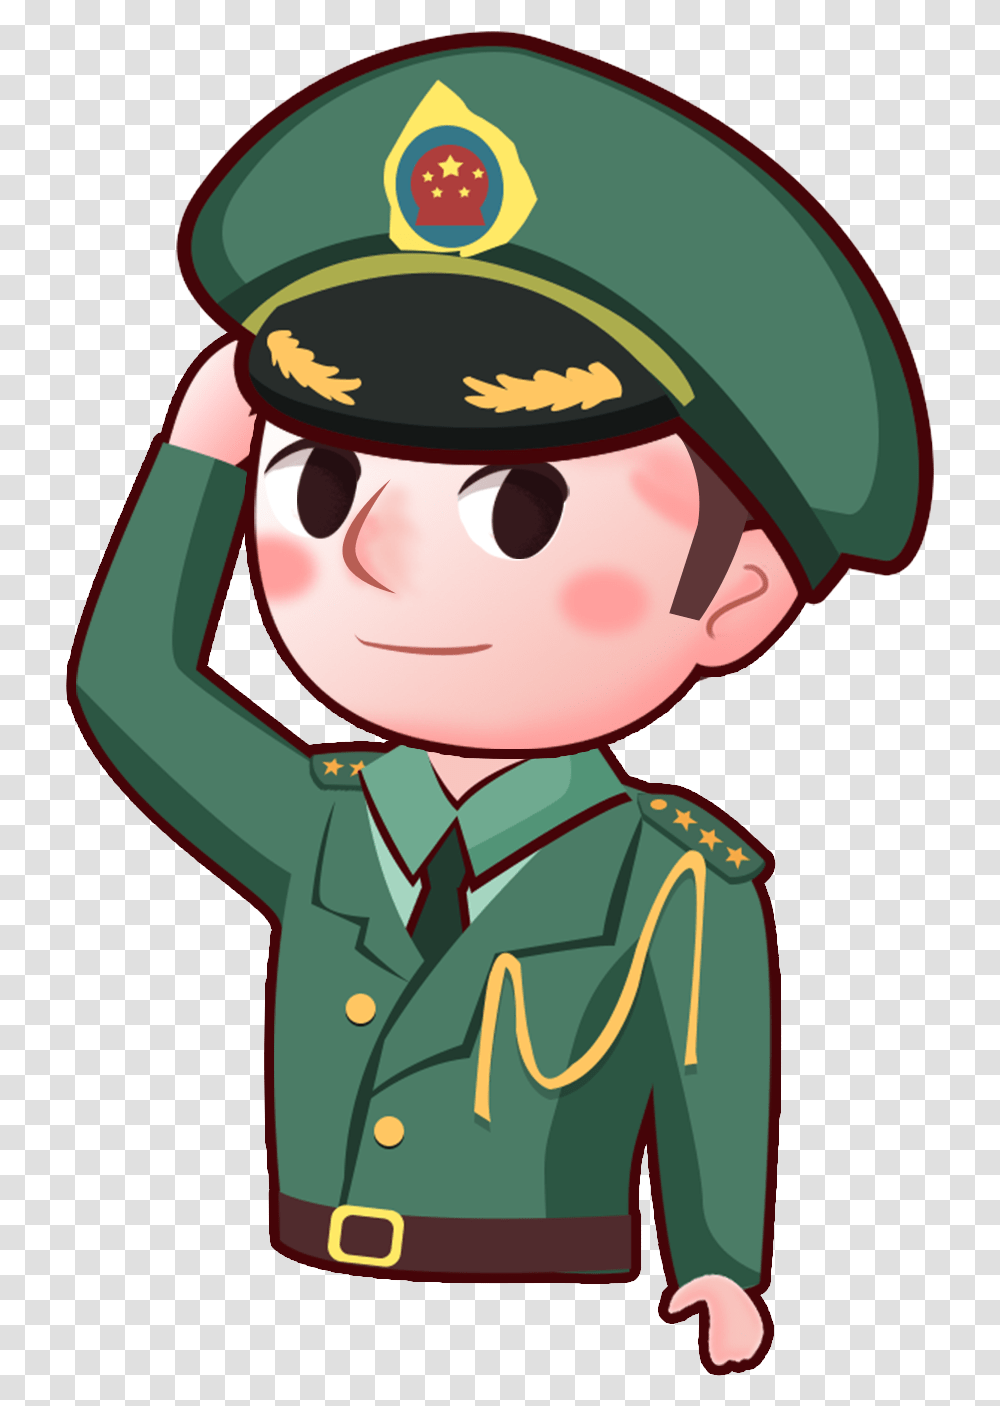 Cartoon Version Saluting Army Soldier Cartoon Images Of Soldier, Elf, Light, Military Transparent Png